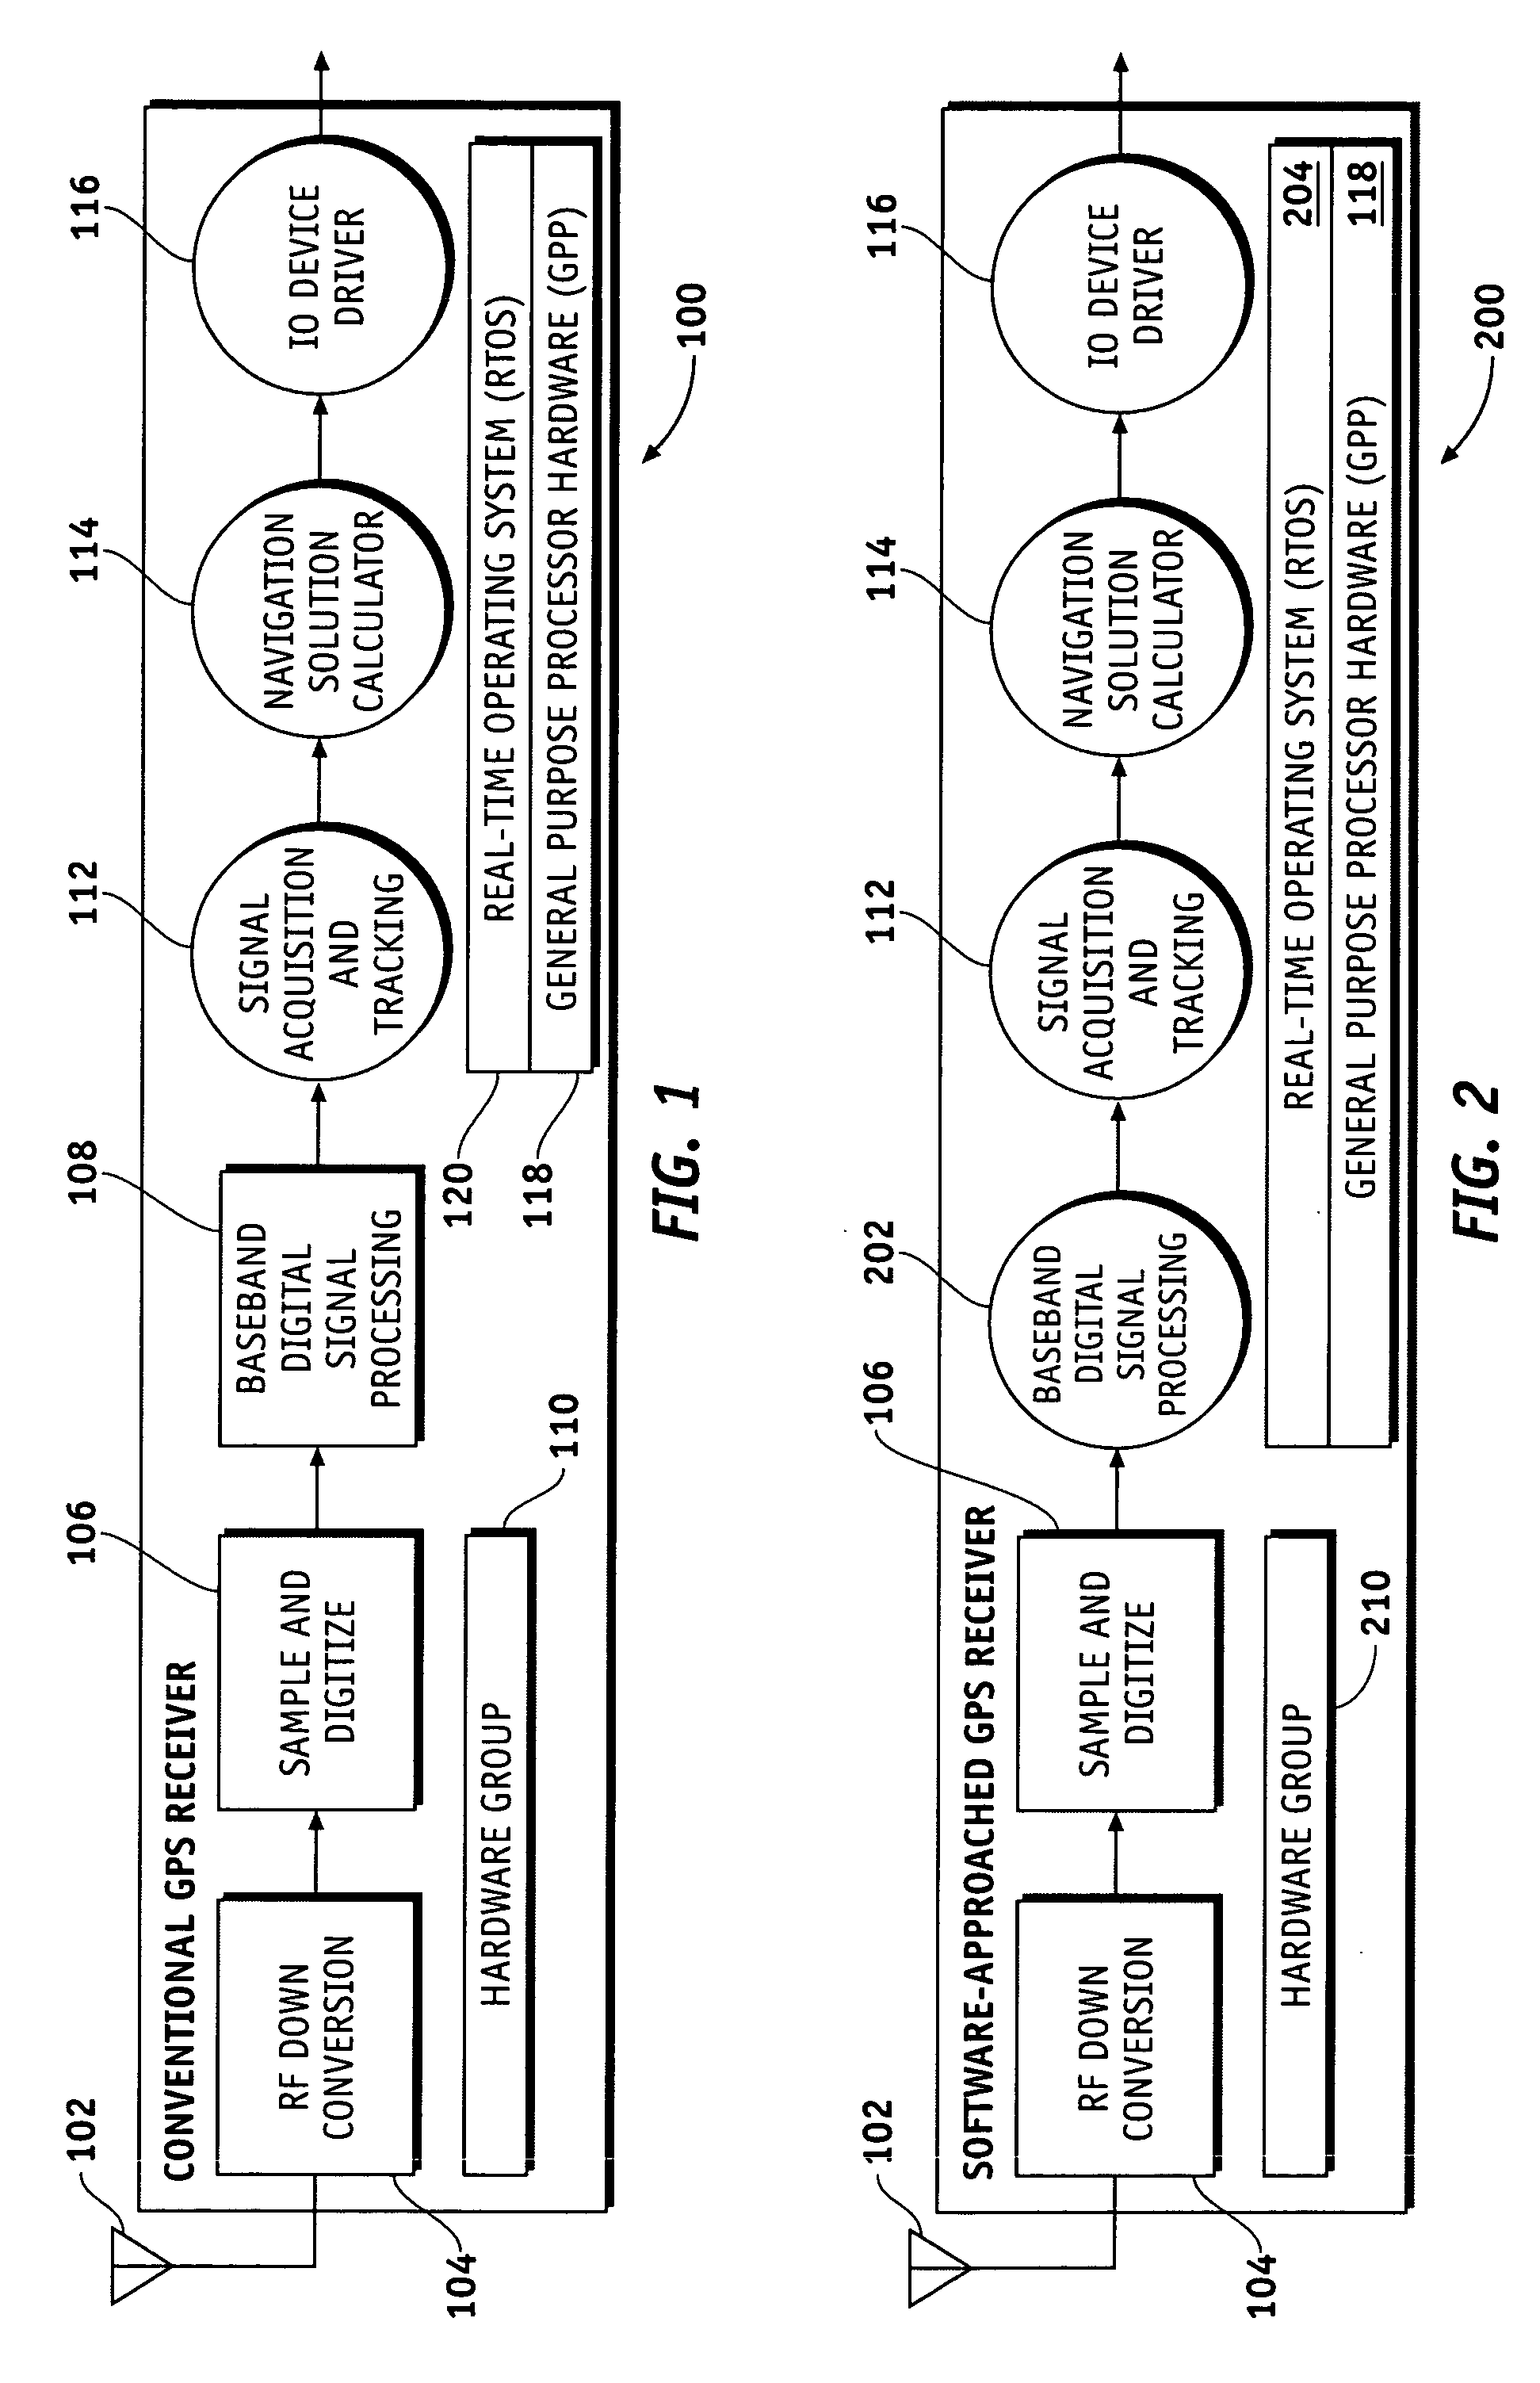 Software-defined GPS receivers and distributed positioning system